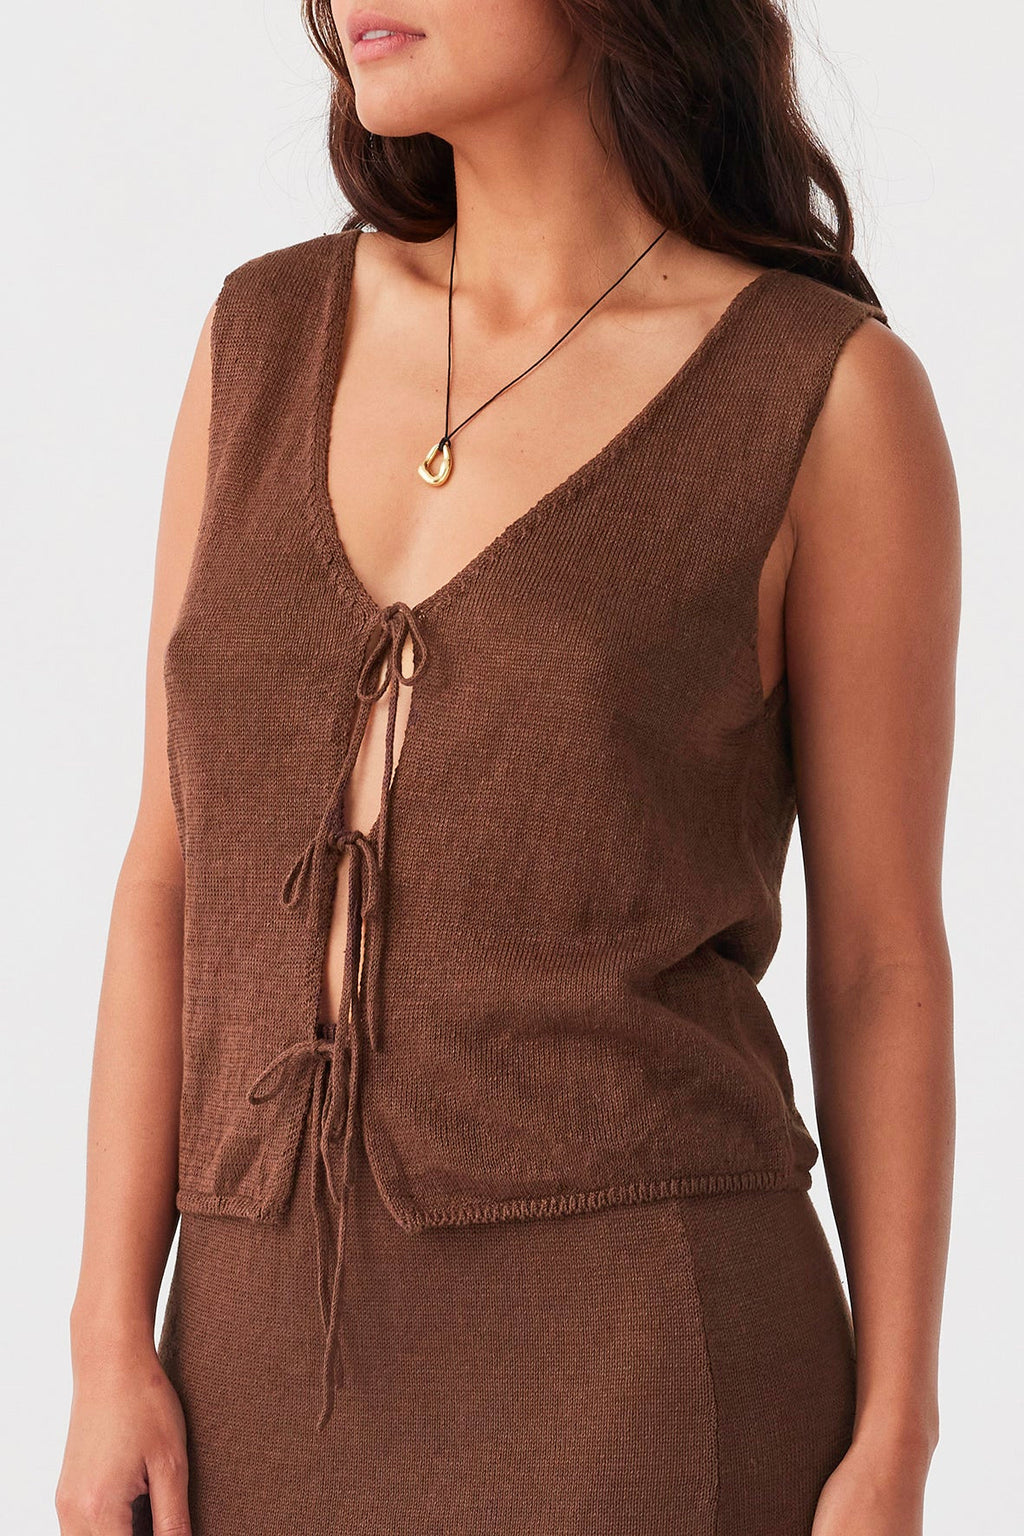 Pearla Knit Top - Chocolate